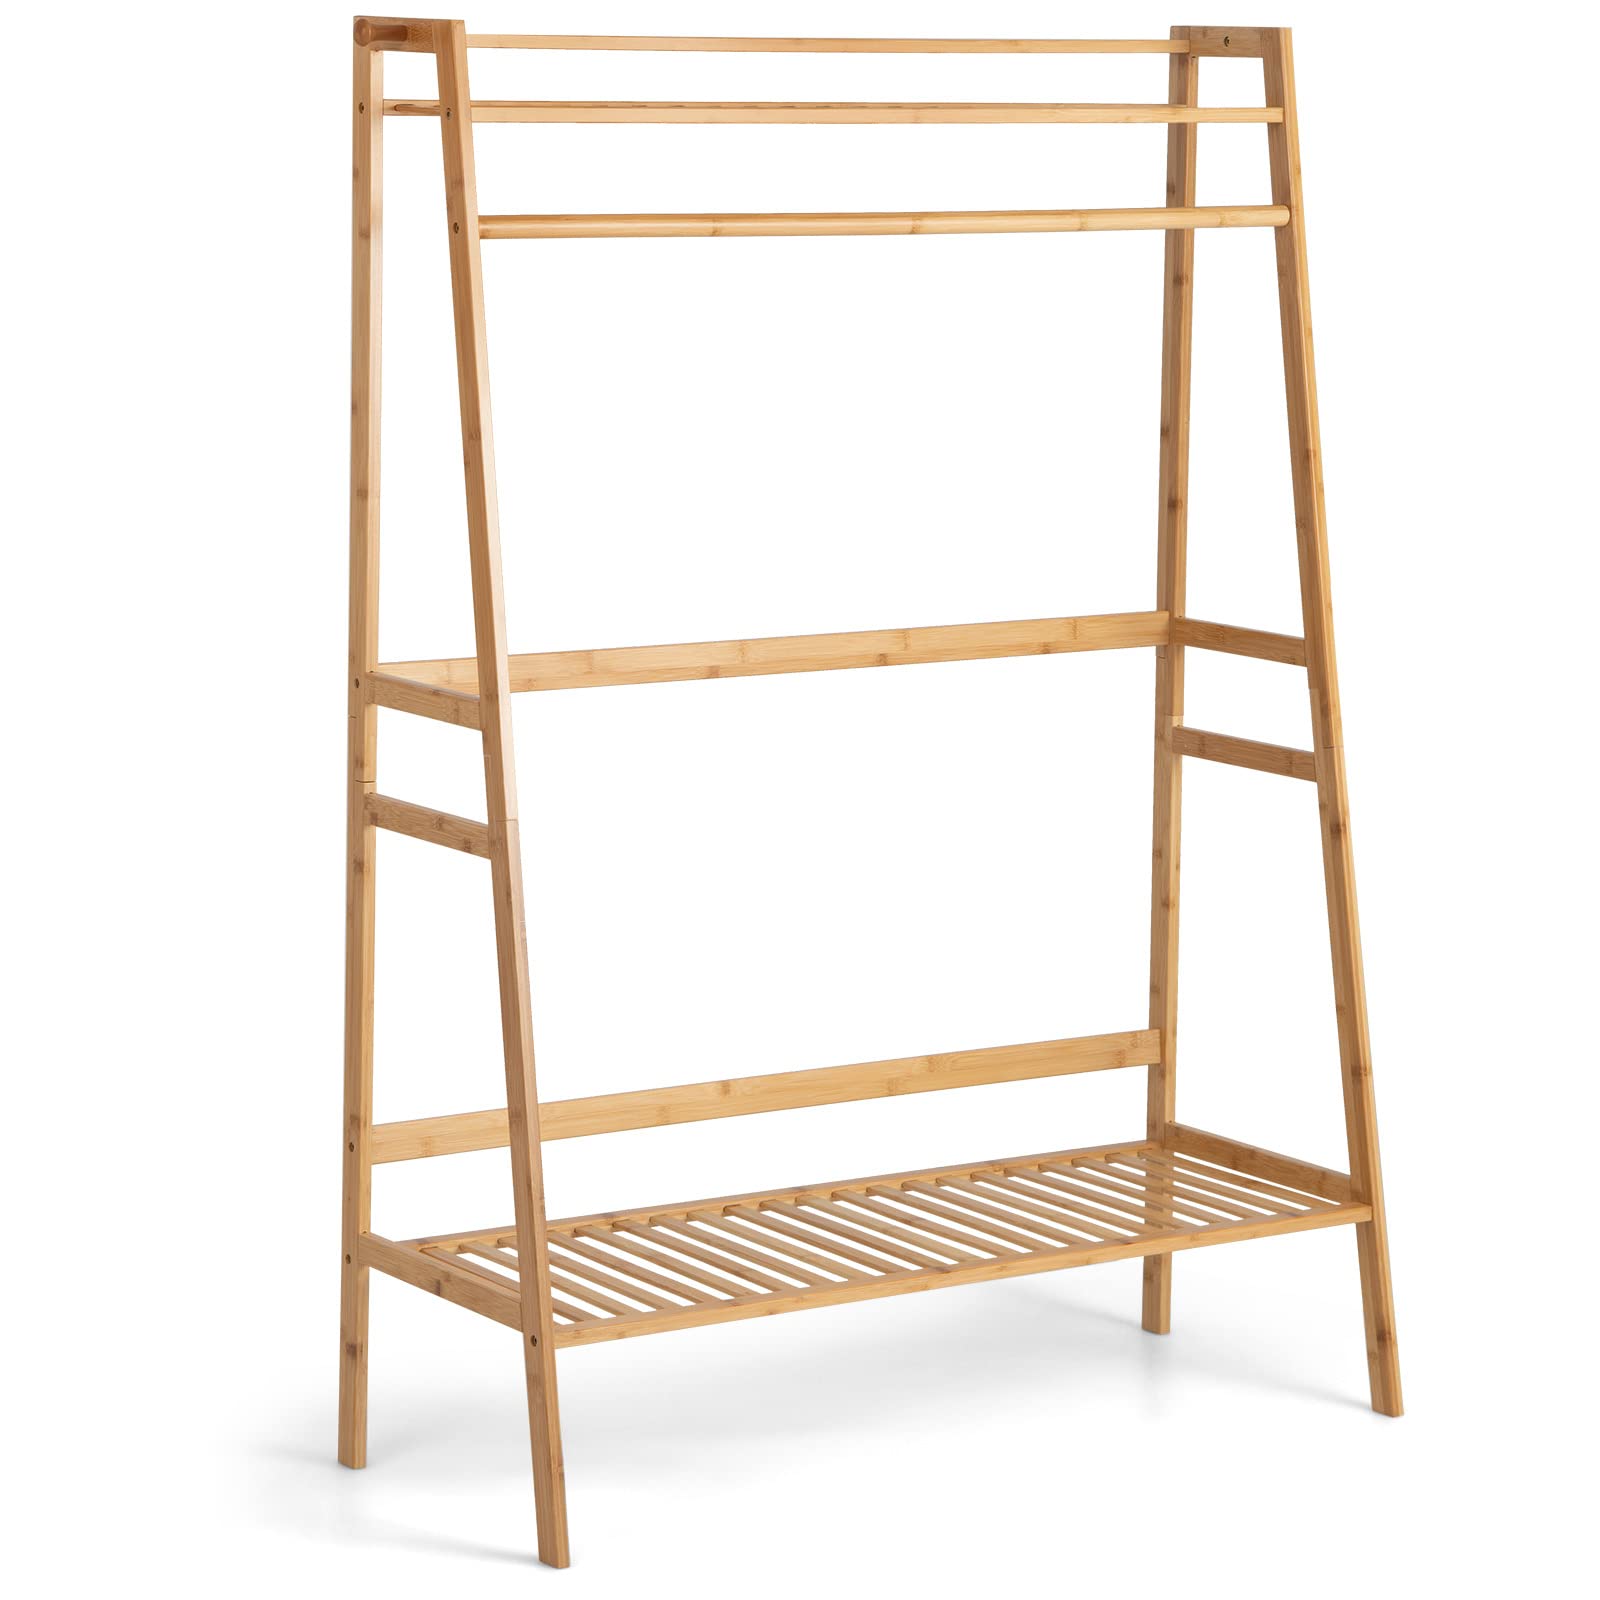 Giantex 3 Tier Bamboo Clothing Rack with Shelves, Heavy Duty Freestanding Clothes Organizer Rack with Coat Hooks